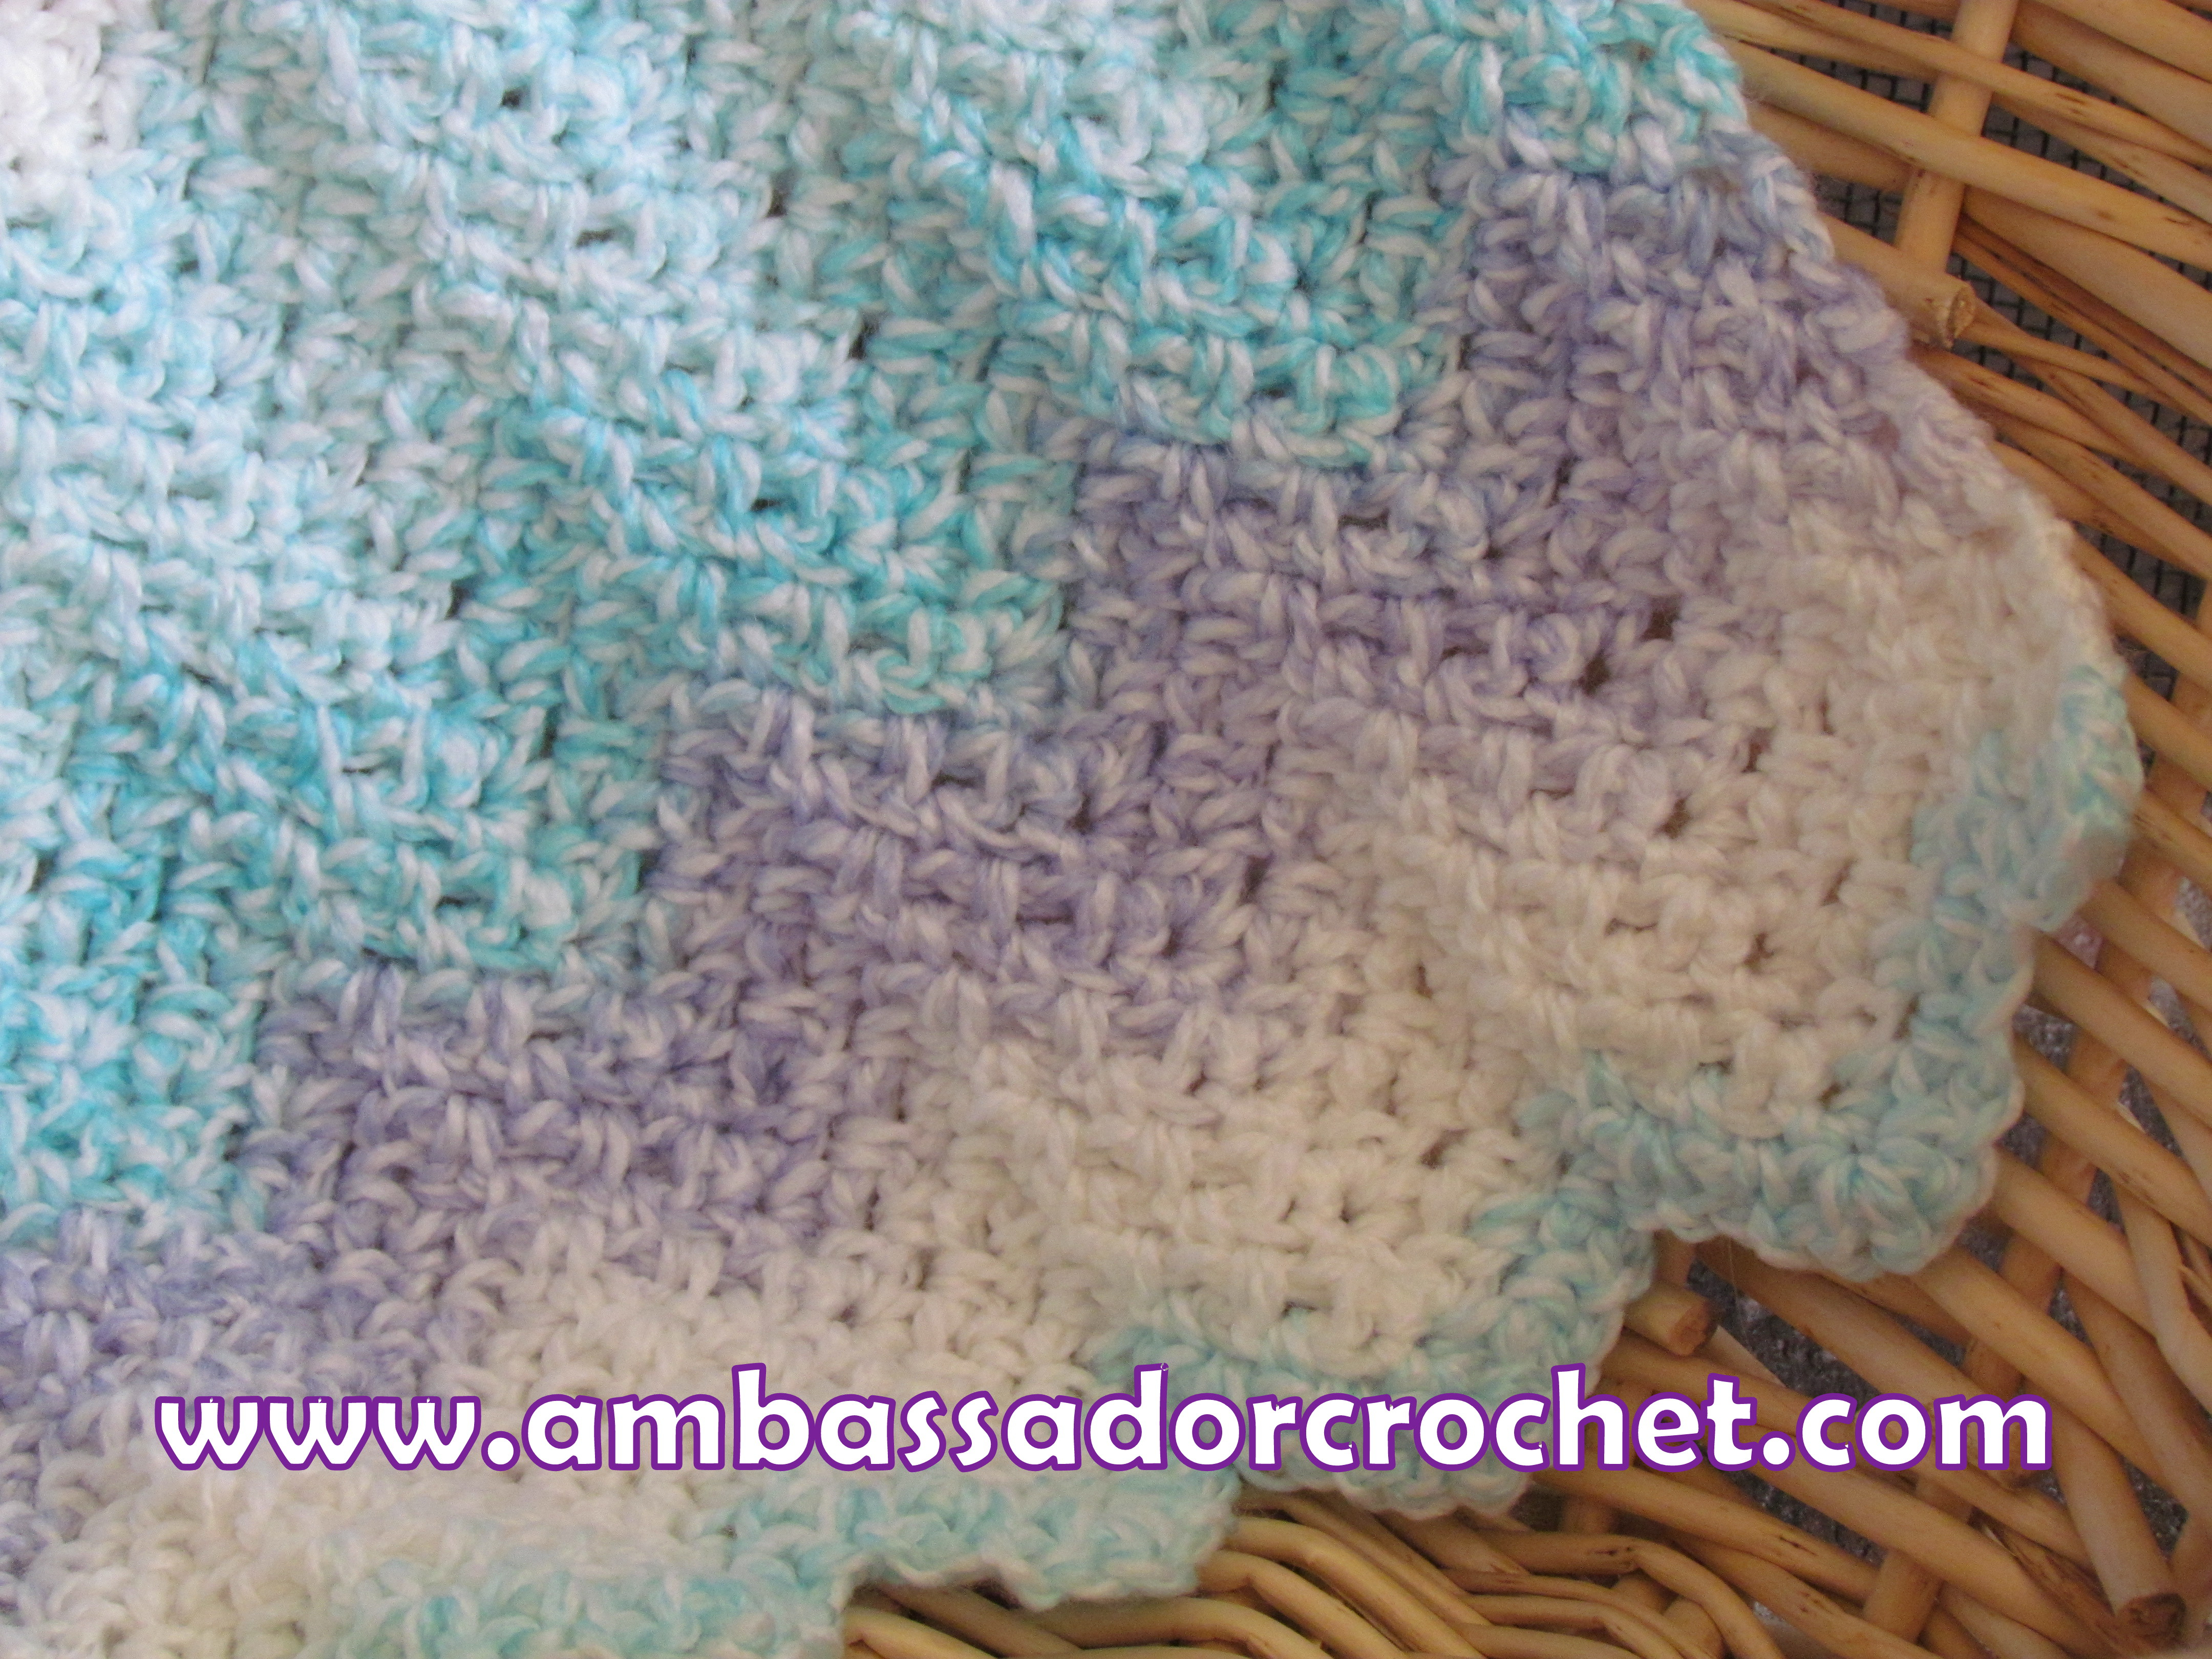 Crochet Baby Shawls Free Patterns Sleep Well With Free Crochet Patterns For Ba Blankets Crochet